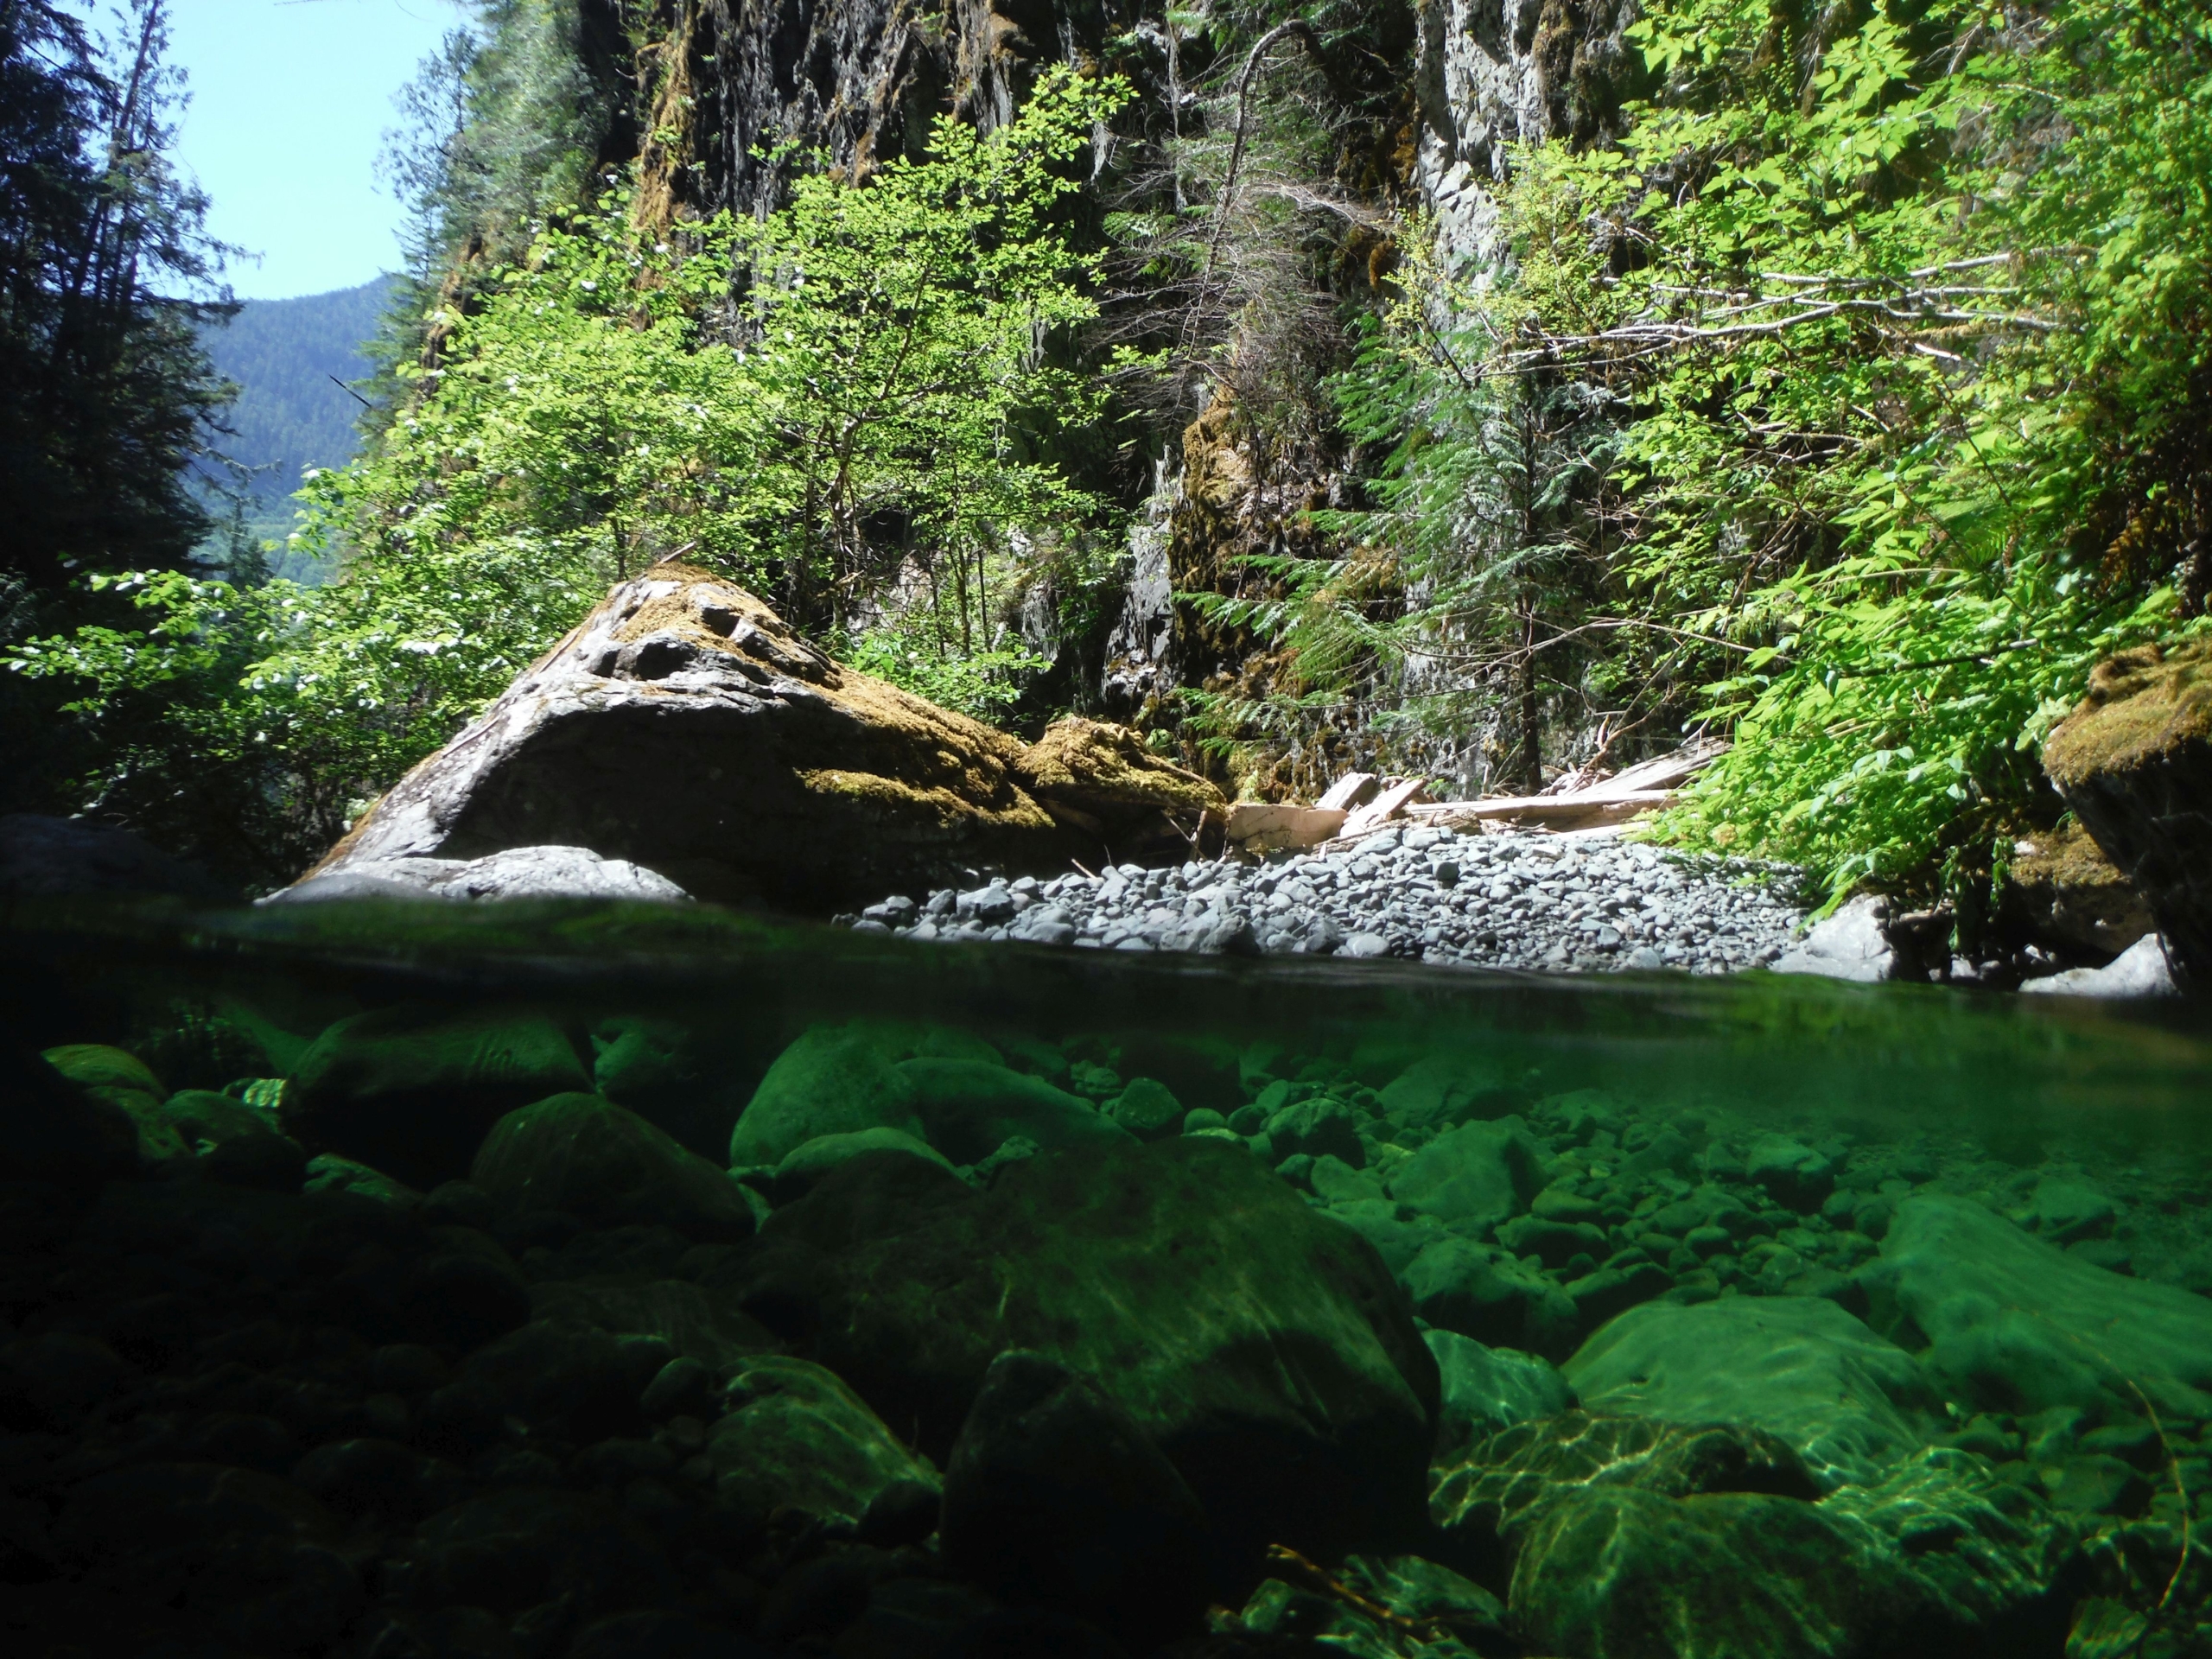 Underwater river on Vancouver Island surrounded by riparian trees